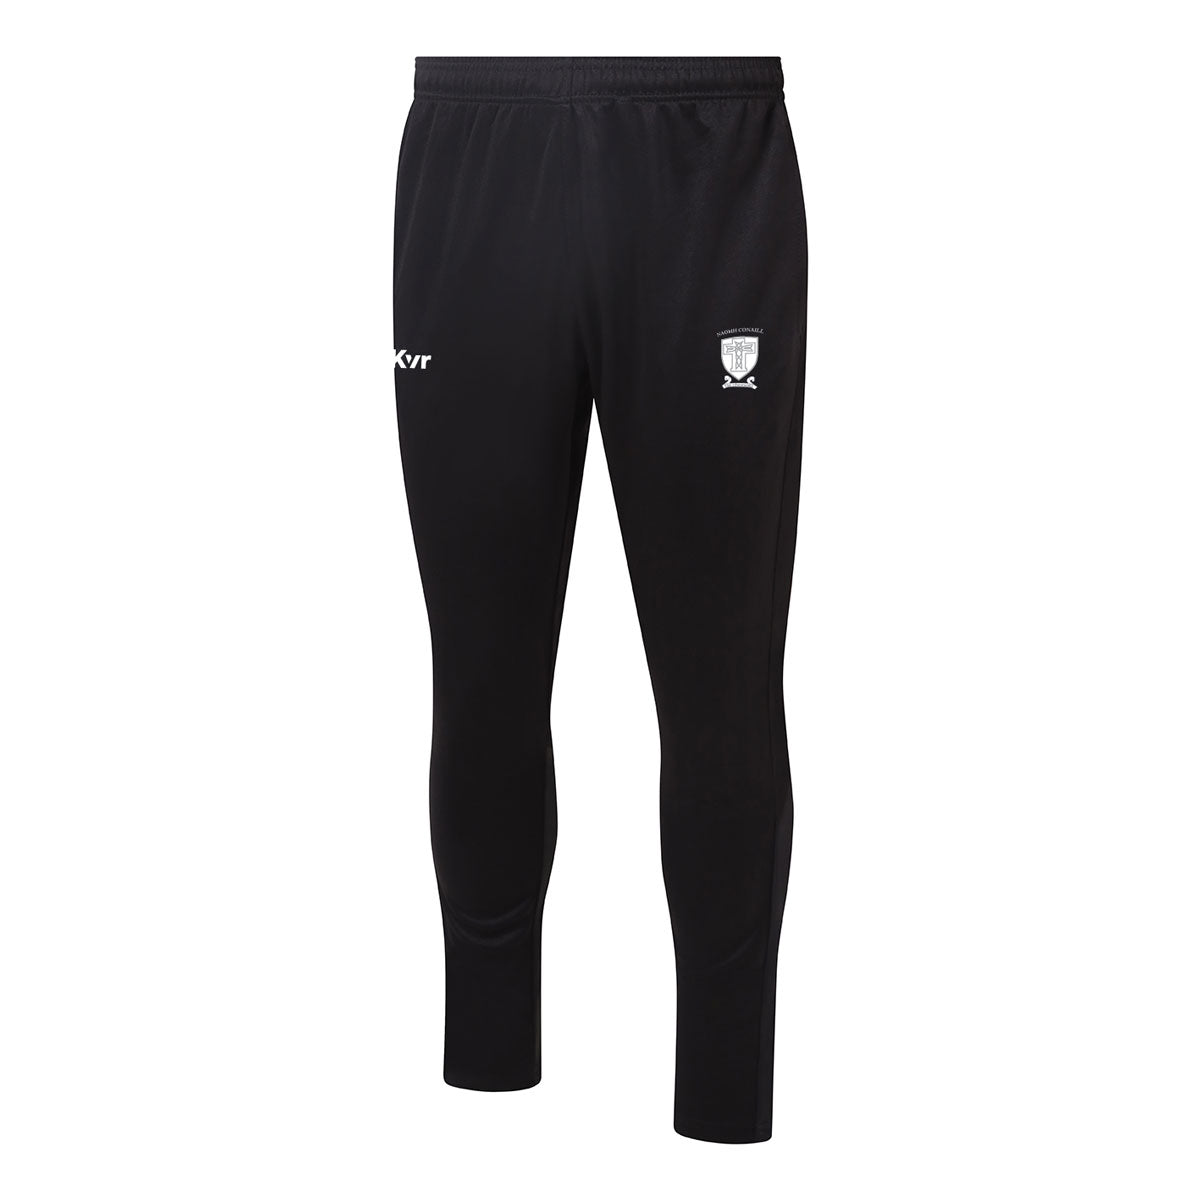 Mc Keever Naomh Conaill Donegal Core 22 Skinny Pants - Youth - Black